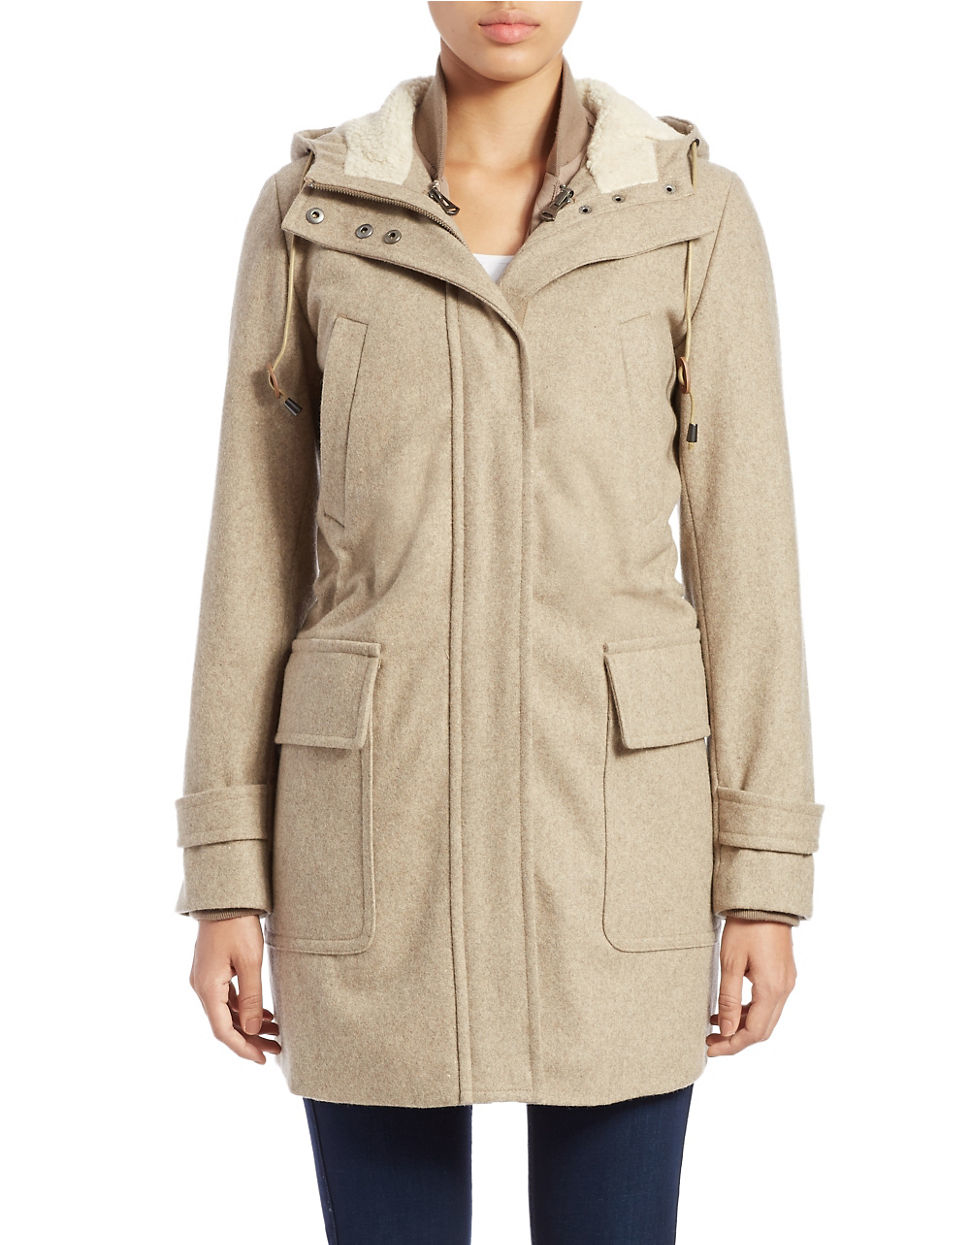 Lyst - Cole Haan Two-piece Wool-blend Anorak Jacket in Natural